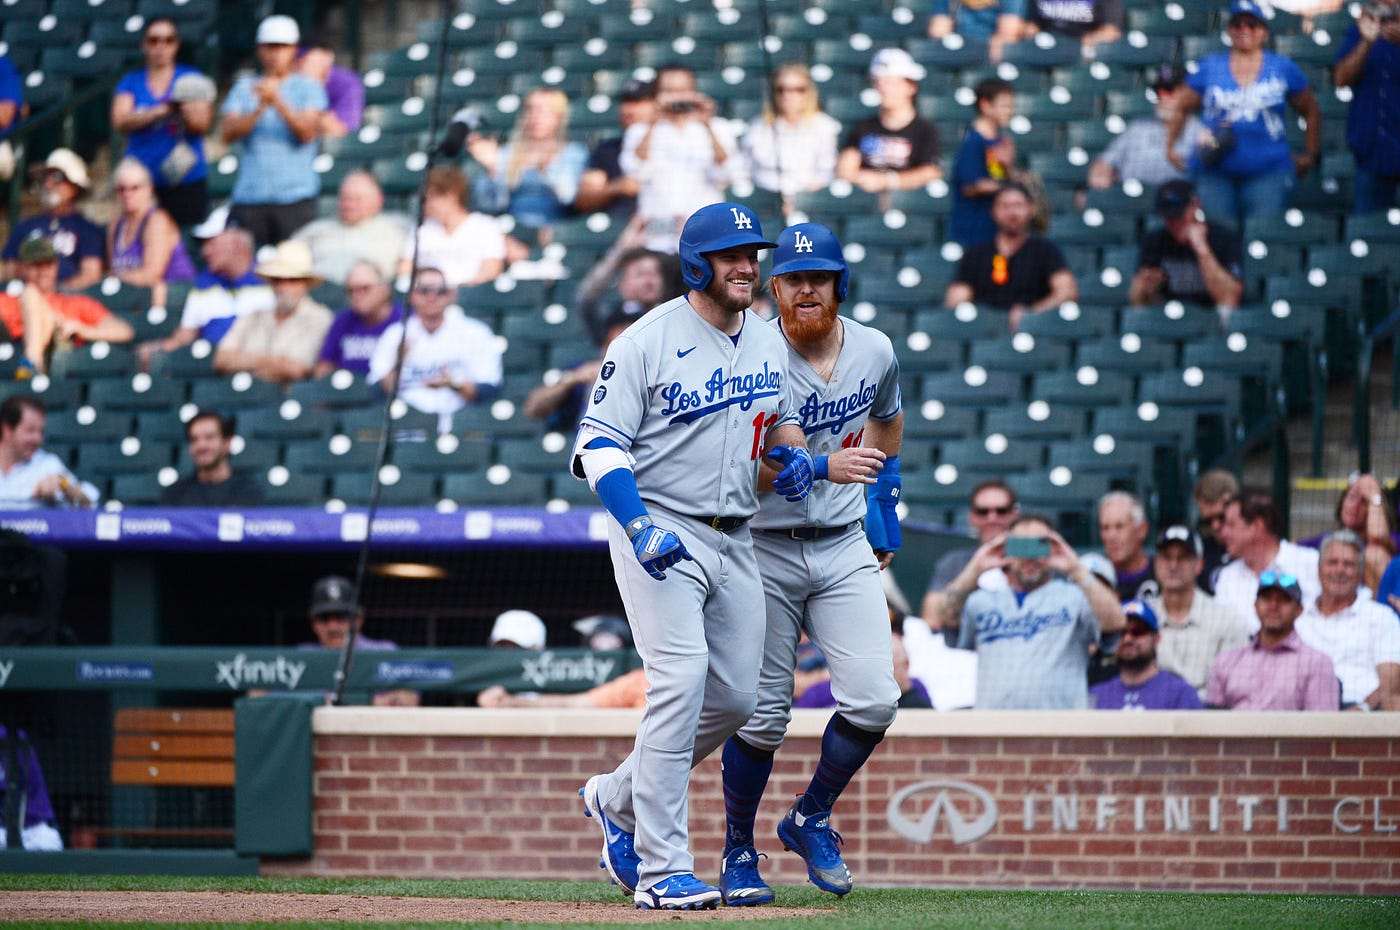 Five-run second inning sparks Dodgers in win over Nationals - Los